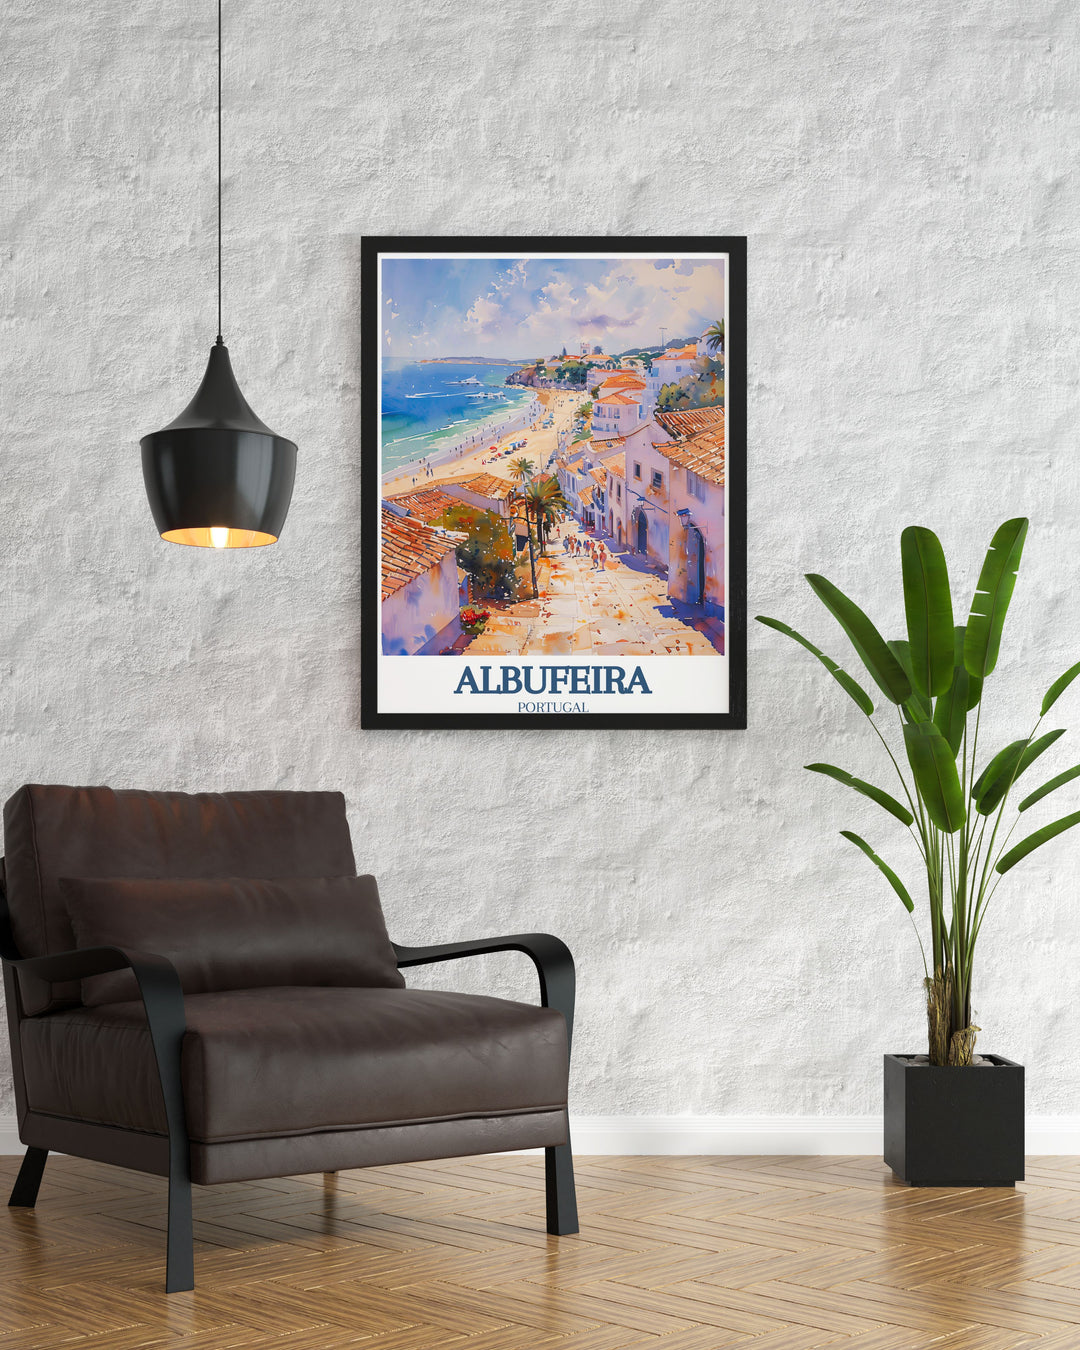 Scenic print of Strip de Albufeira in Albufeira, offering a glimpse into the lively atmosphere and dynamic nightlife of this vibrant district.